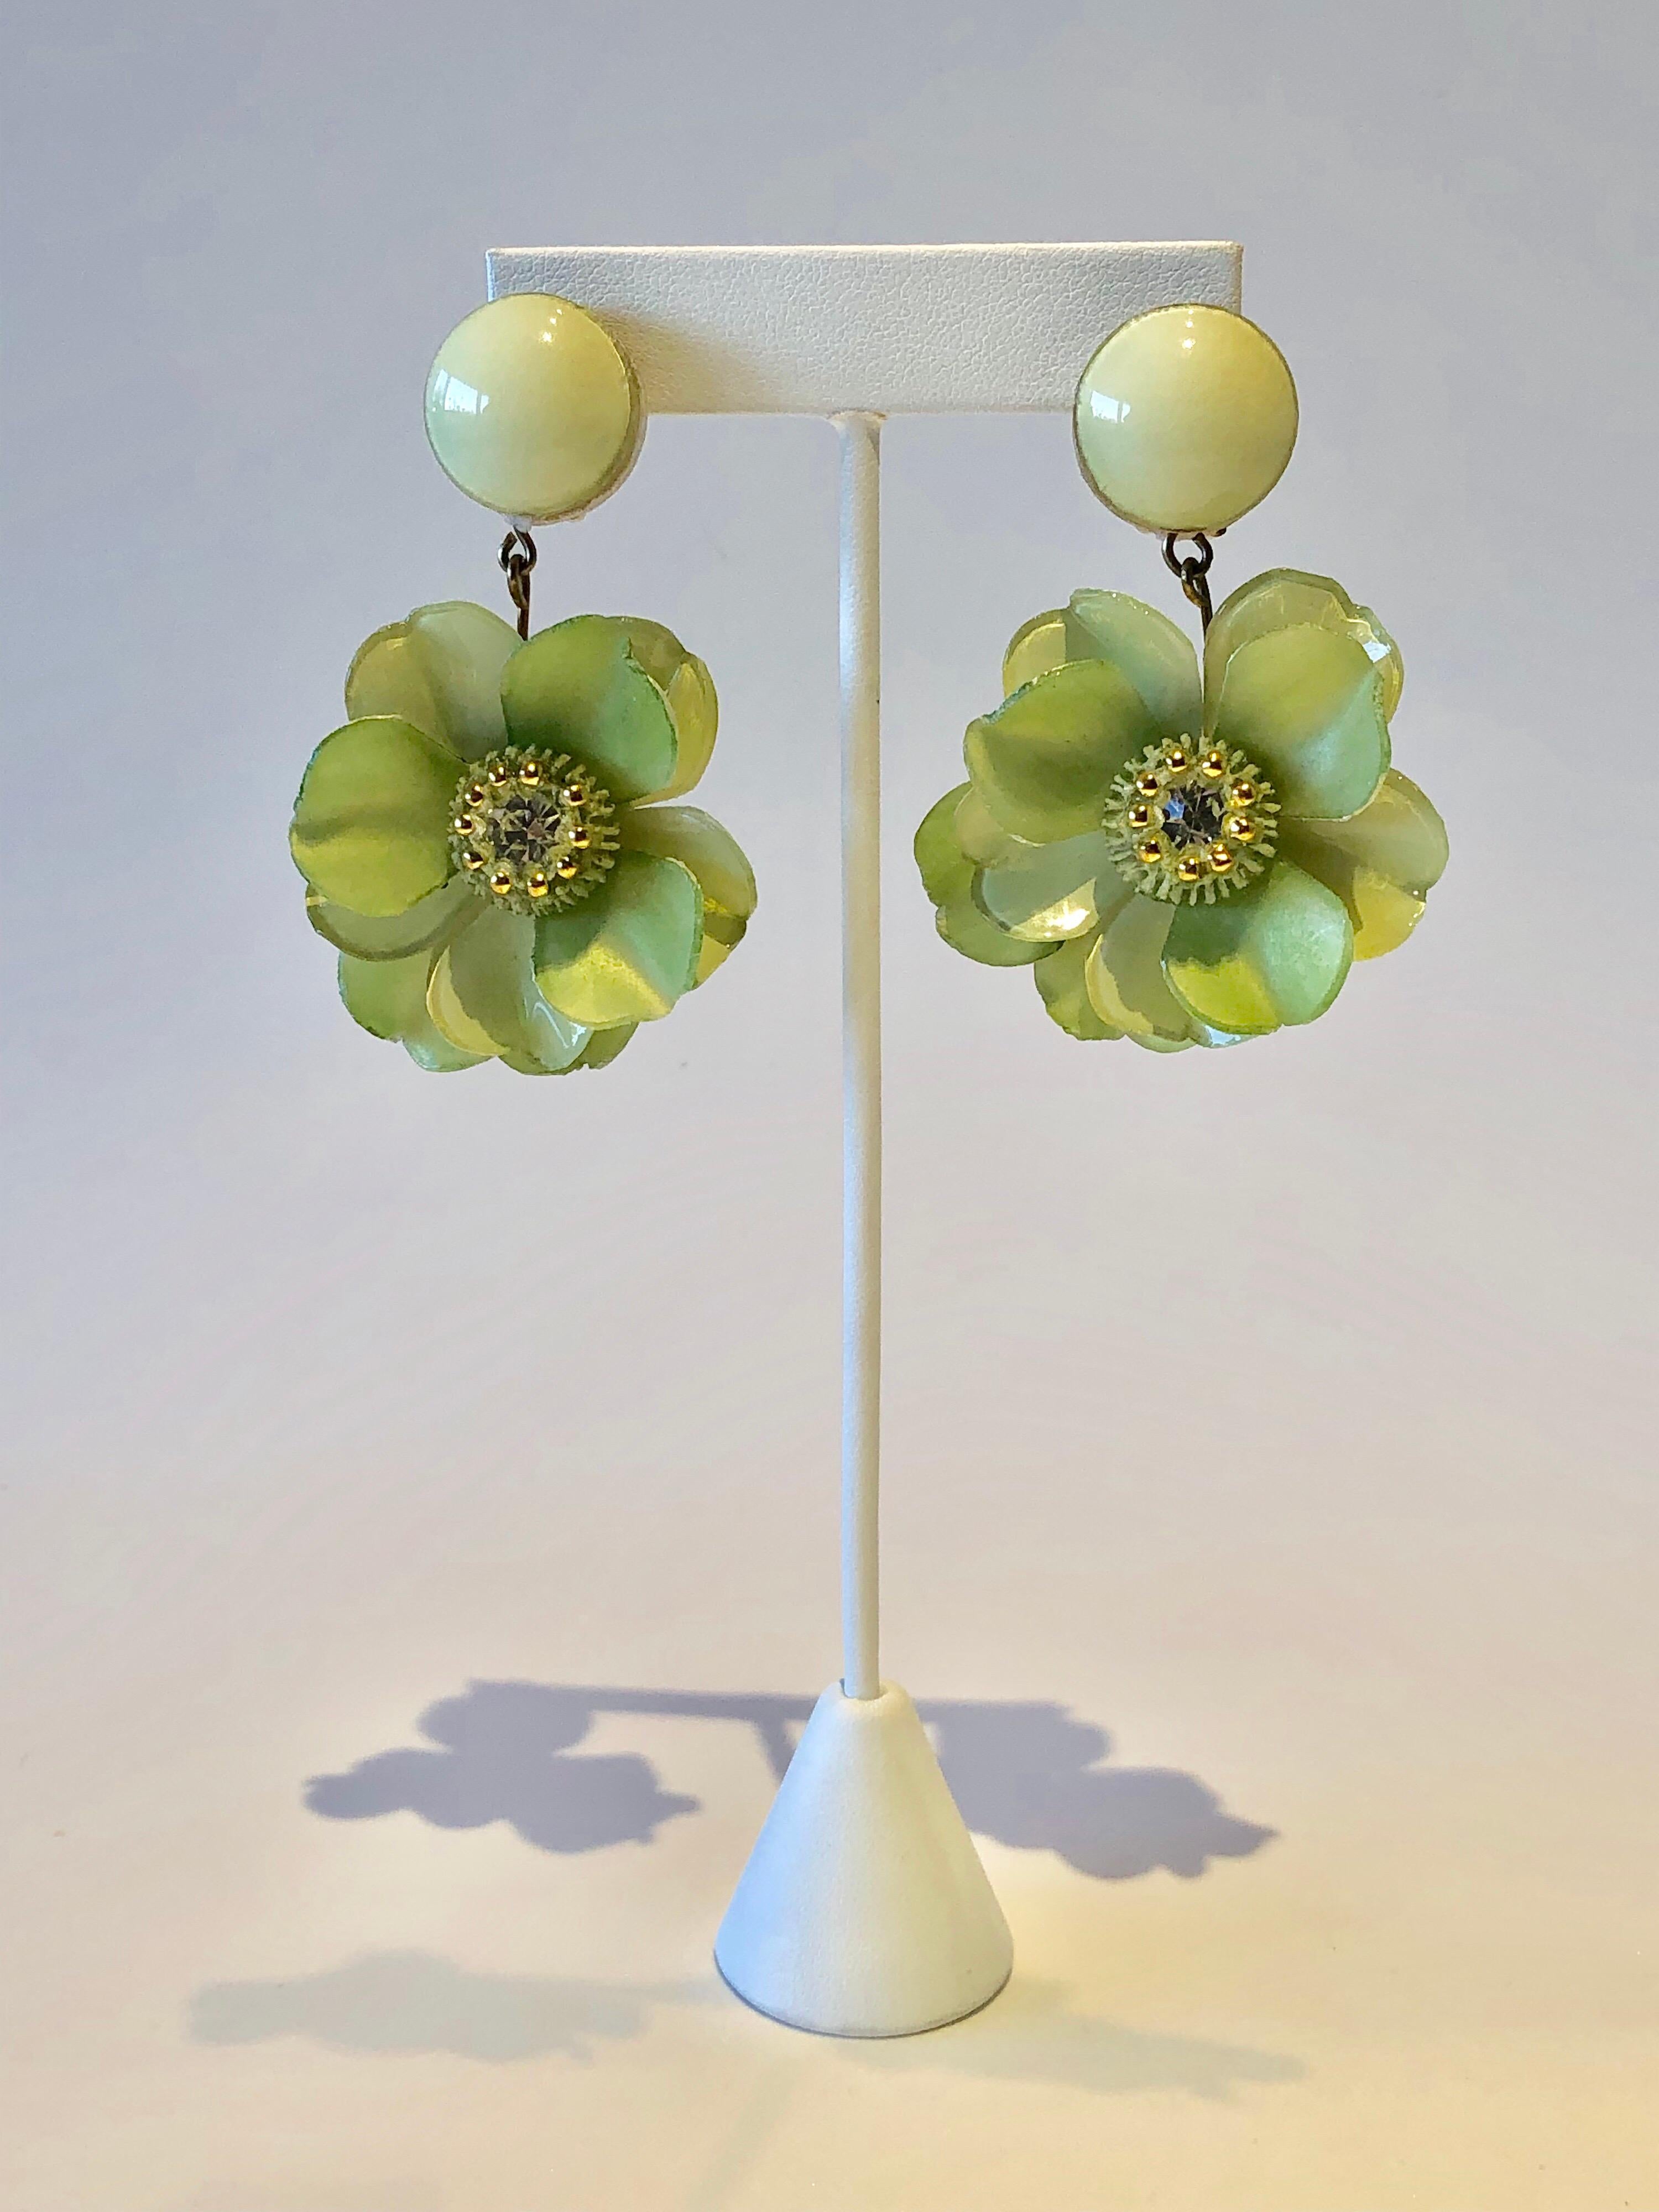 Three-dimensional artisanal flower clip-on earrings by Cilea Paris. The enamel/resin earrings feature large pale green flowers which are accented by an elaborate detailed talosel center with a different pattern and a large clear rhinestone, giving